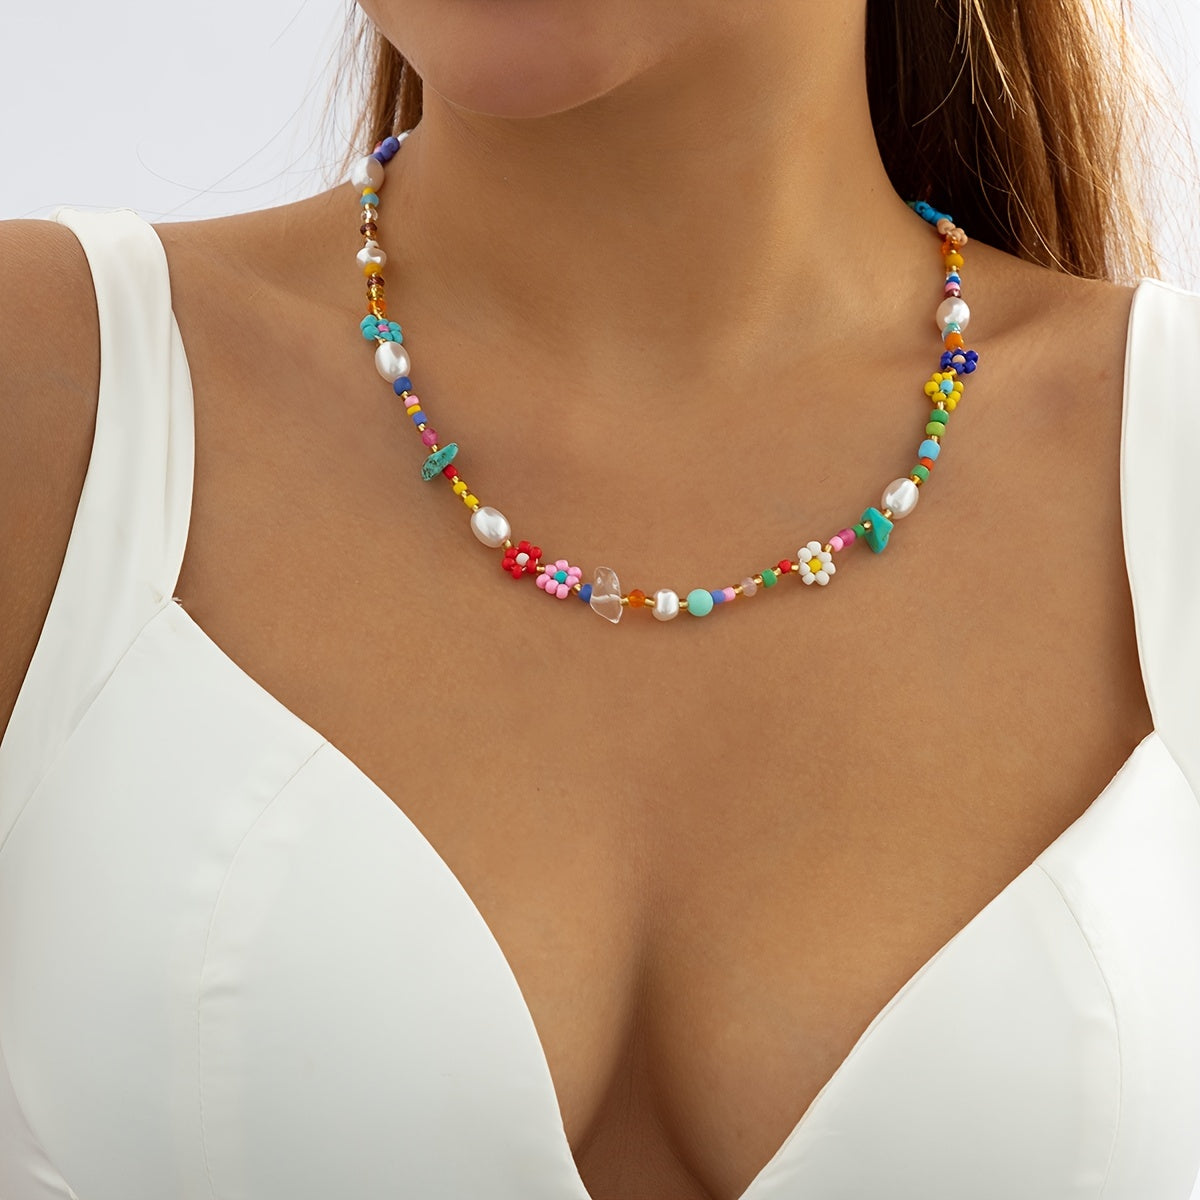 Gorgeous Floral Flower Choker Necklace - Colorful Rice Beads Holiday Jewelry for Women & Girls